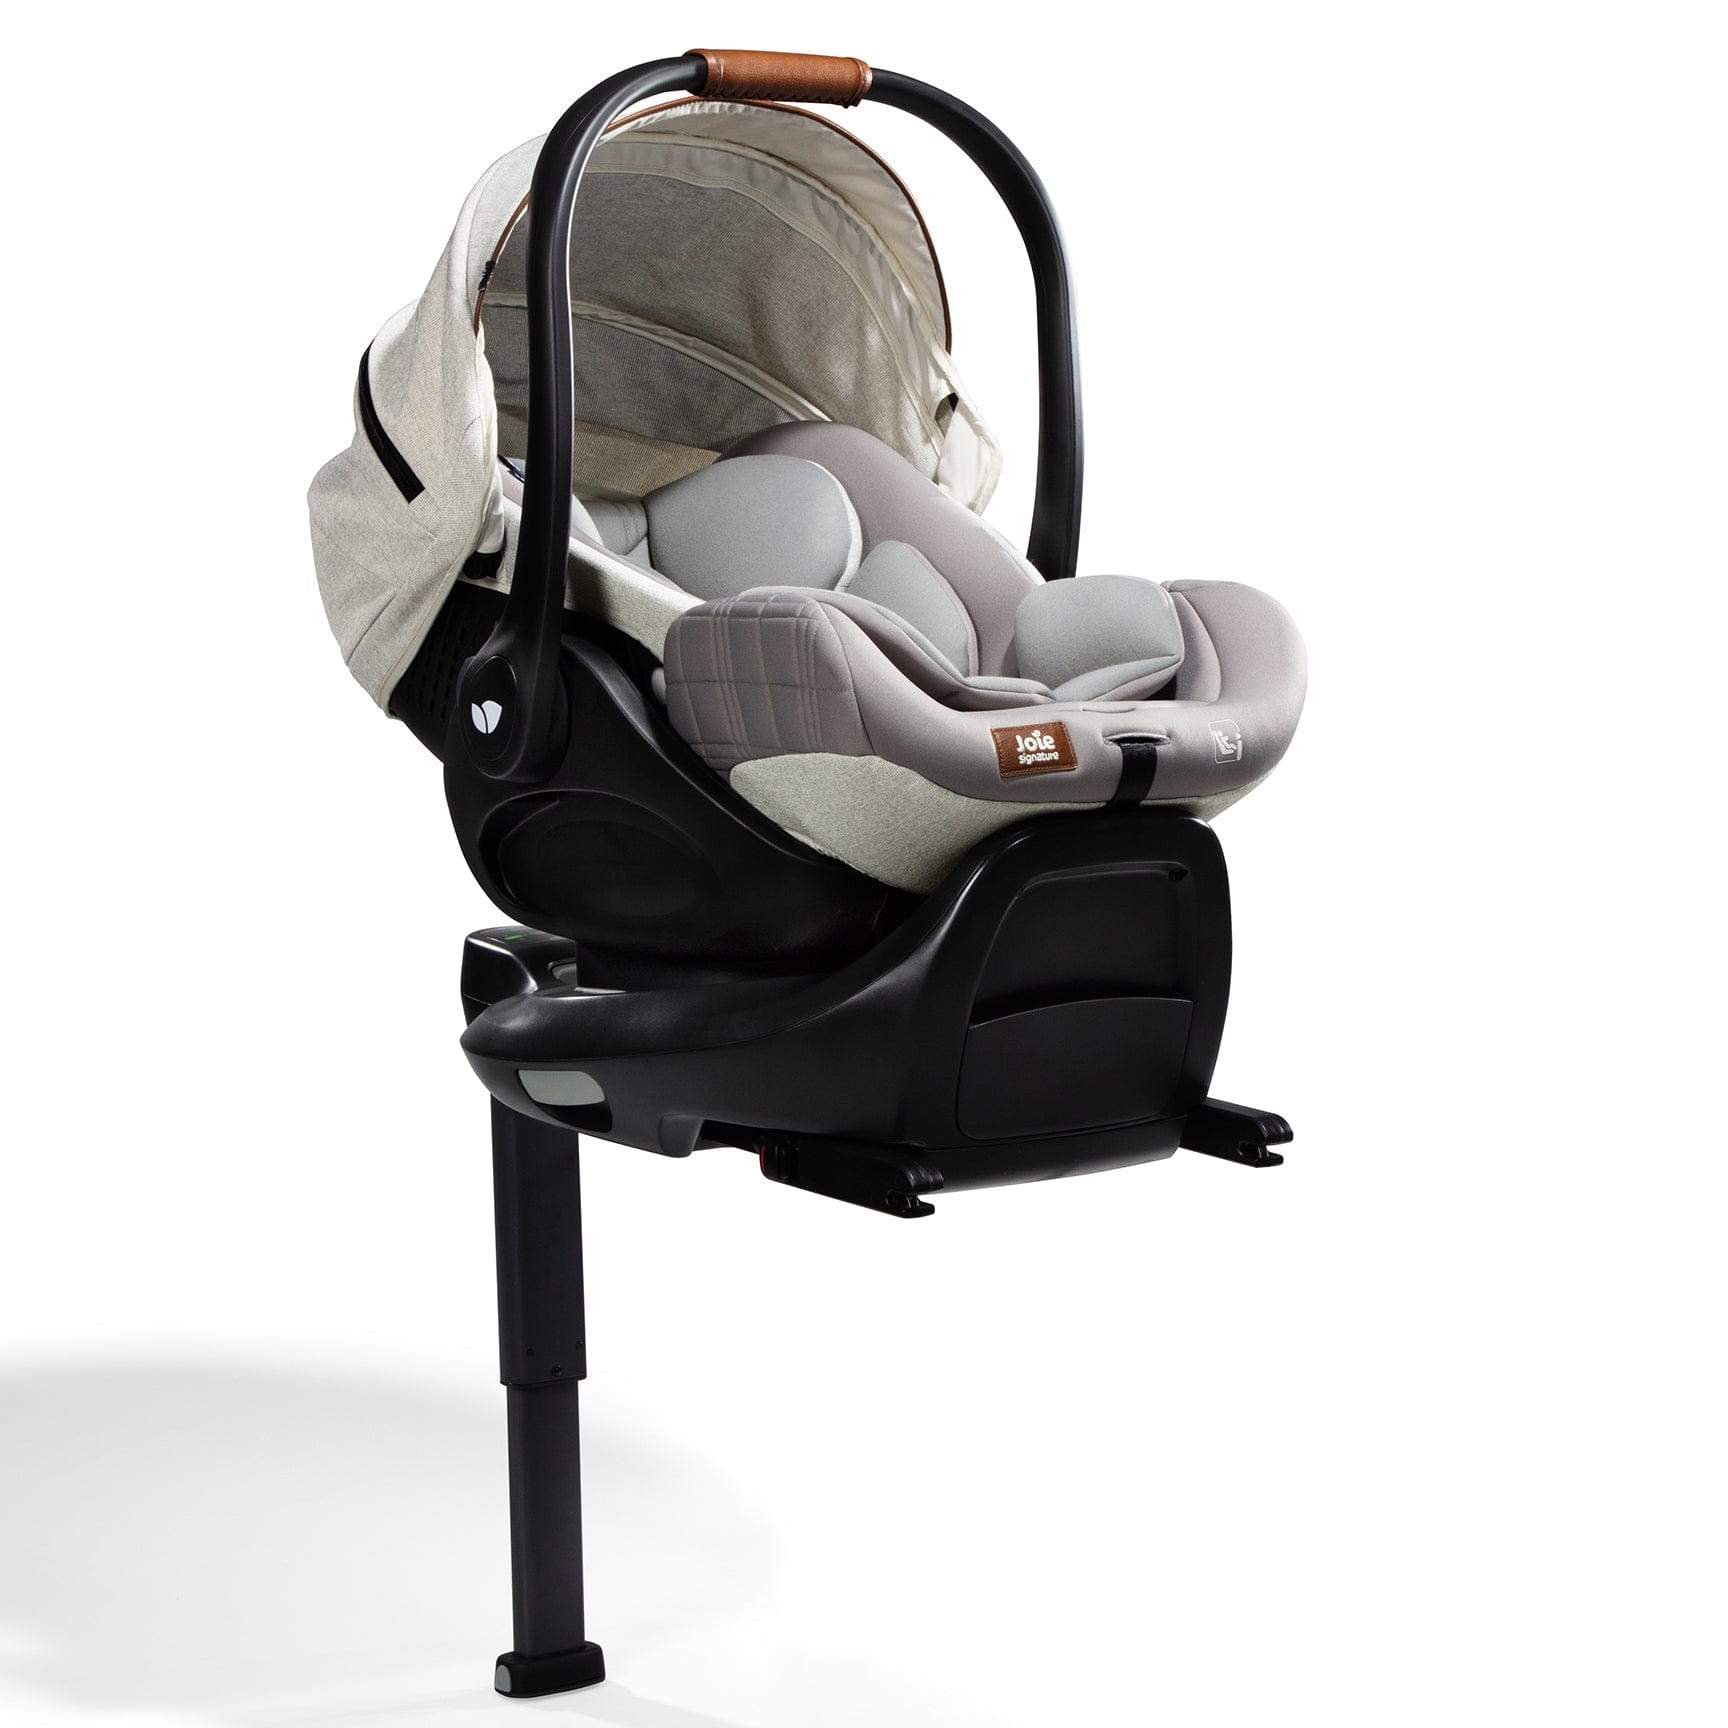 Joie i-Level Recline Signature Car Seat in Oyster Baby Car Seats C1510GAOYS000 5056080612874